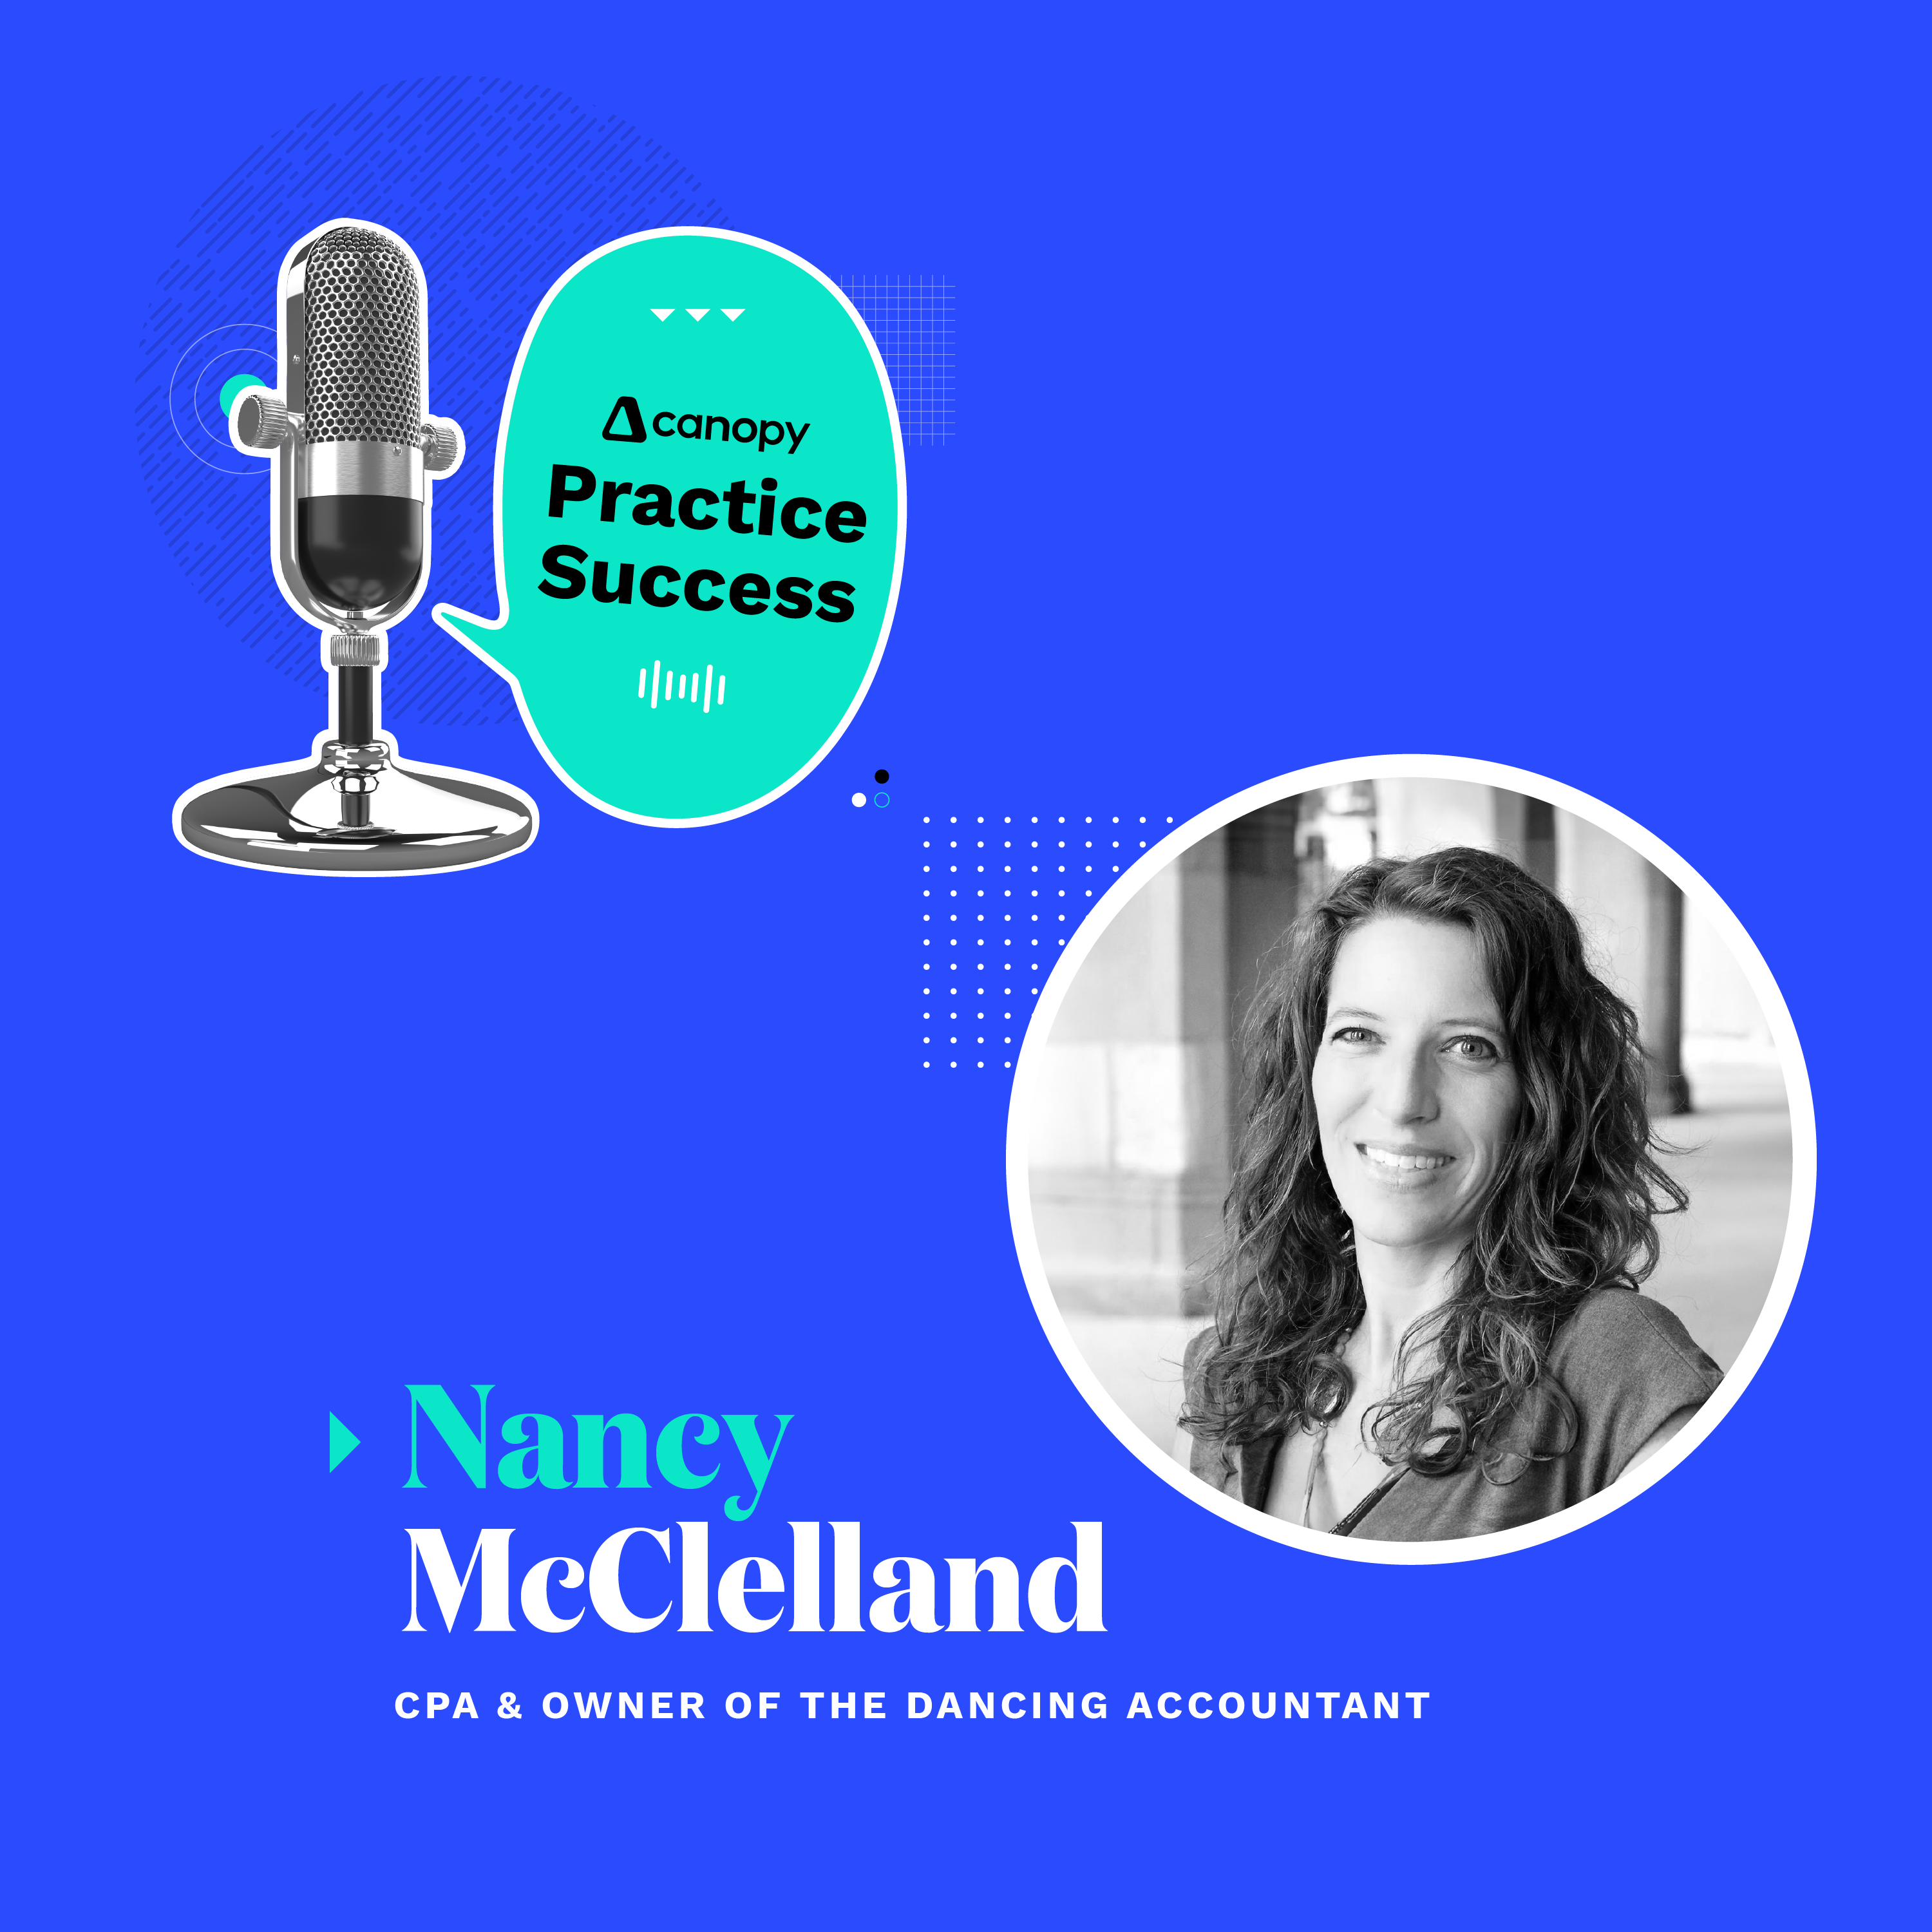 Nancy McClelland on Balancing Passion, Work, and Maintaining the Human Touch in AI